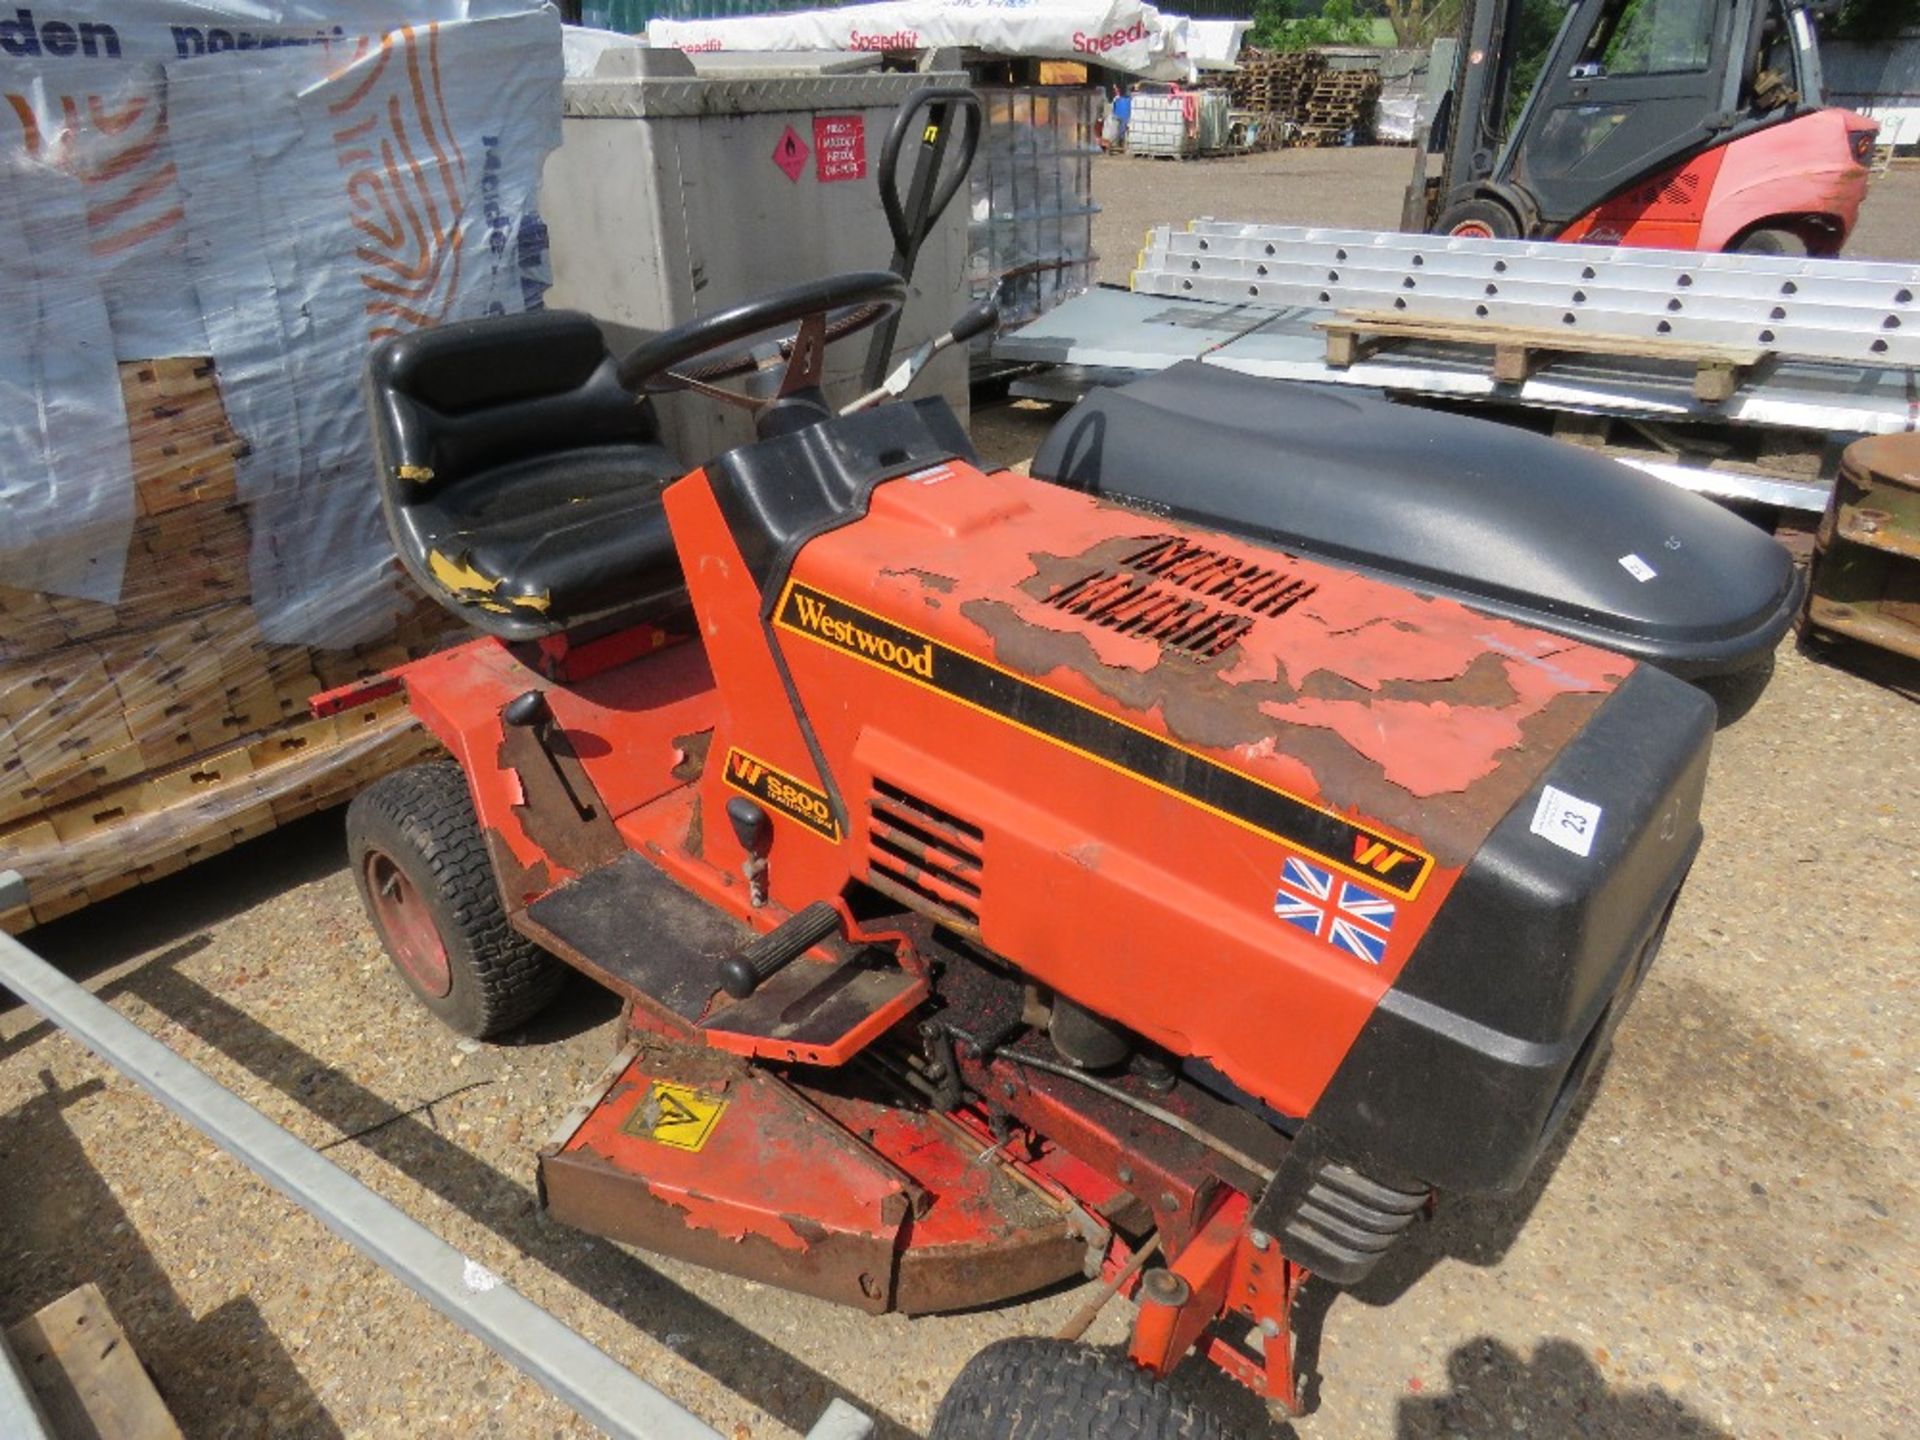 WESTWOOD S800 PETROL ENGINED RIDE ON MOWER. UNTESTED, CONDITION UNKNOWN. - Image 2 of 5